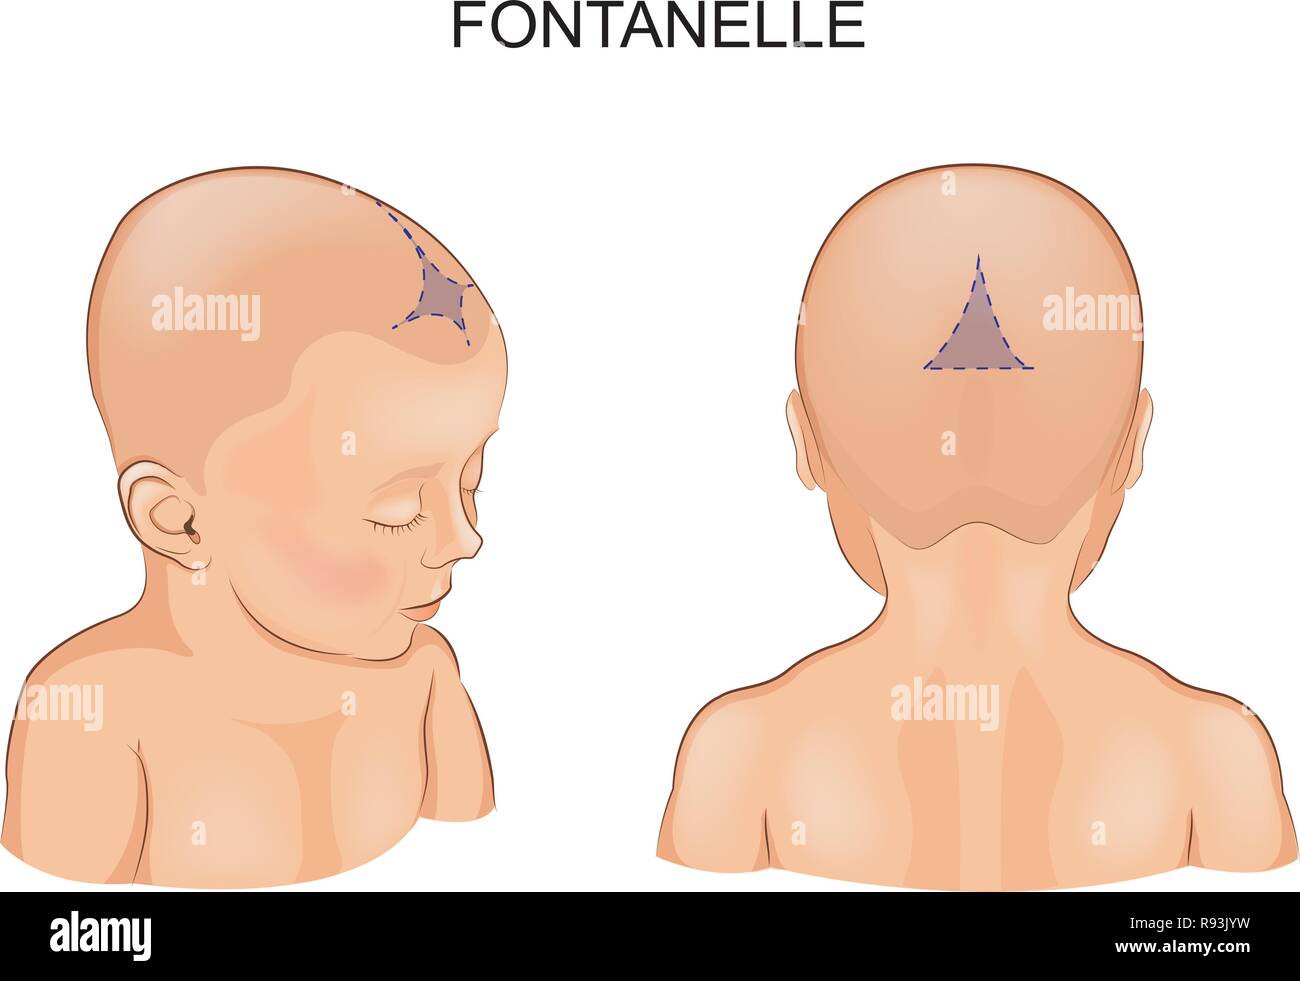 vector illustration of a Fontanelle in the infant Stock Vector